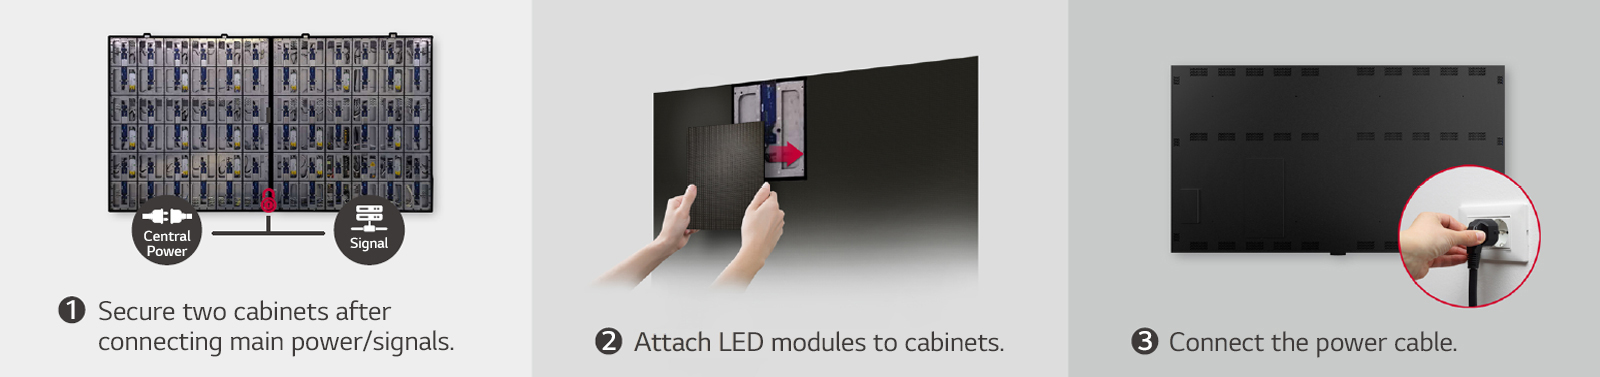 This consists of total 3 steps' images for securing two cabinets, attaching LED modules, and connecting the power cable.